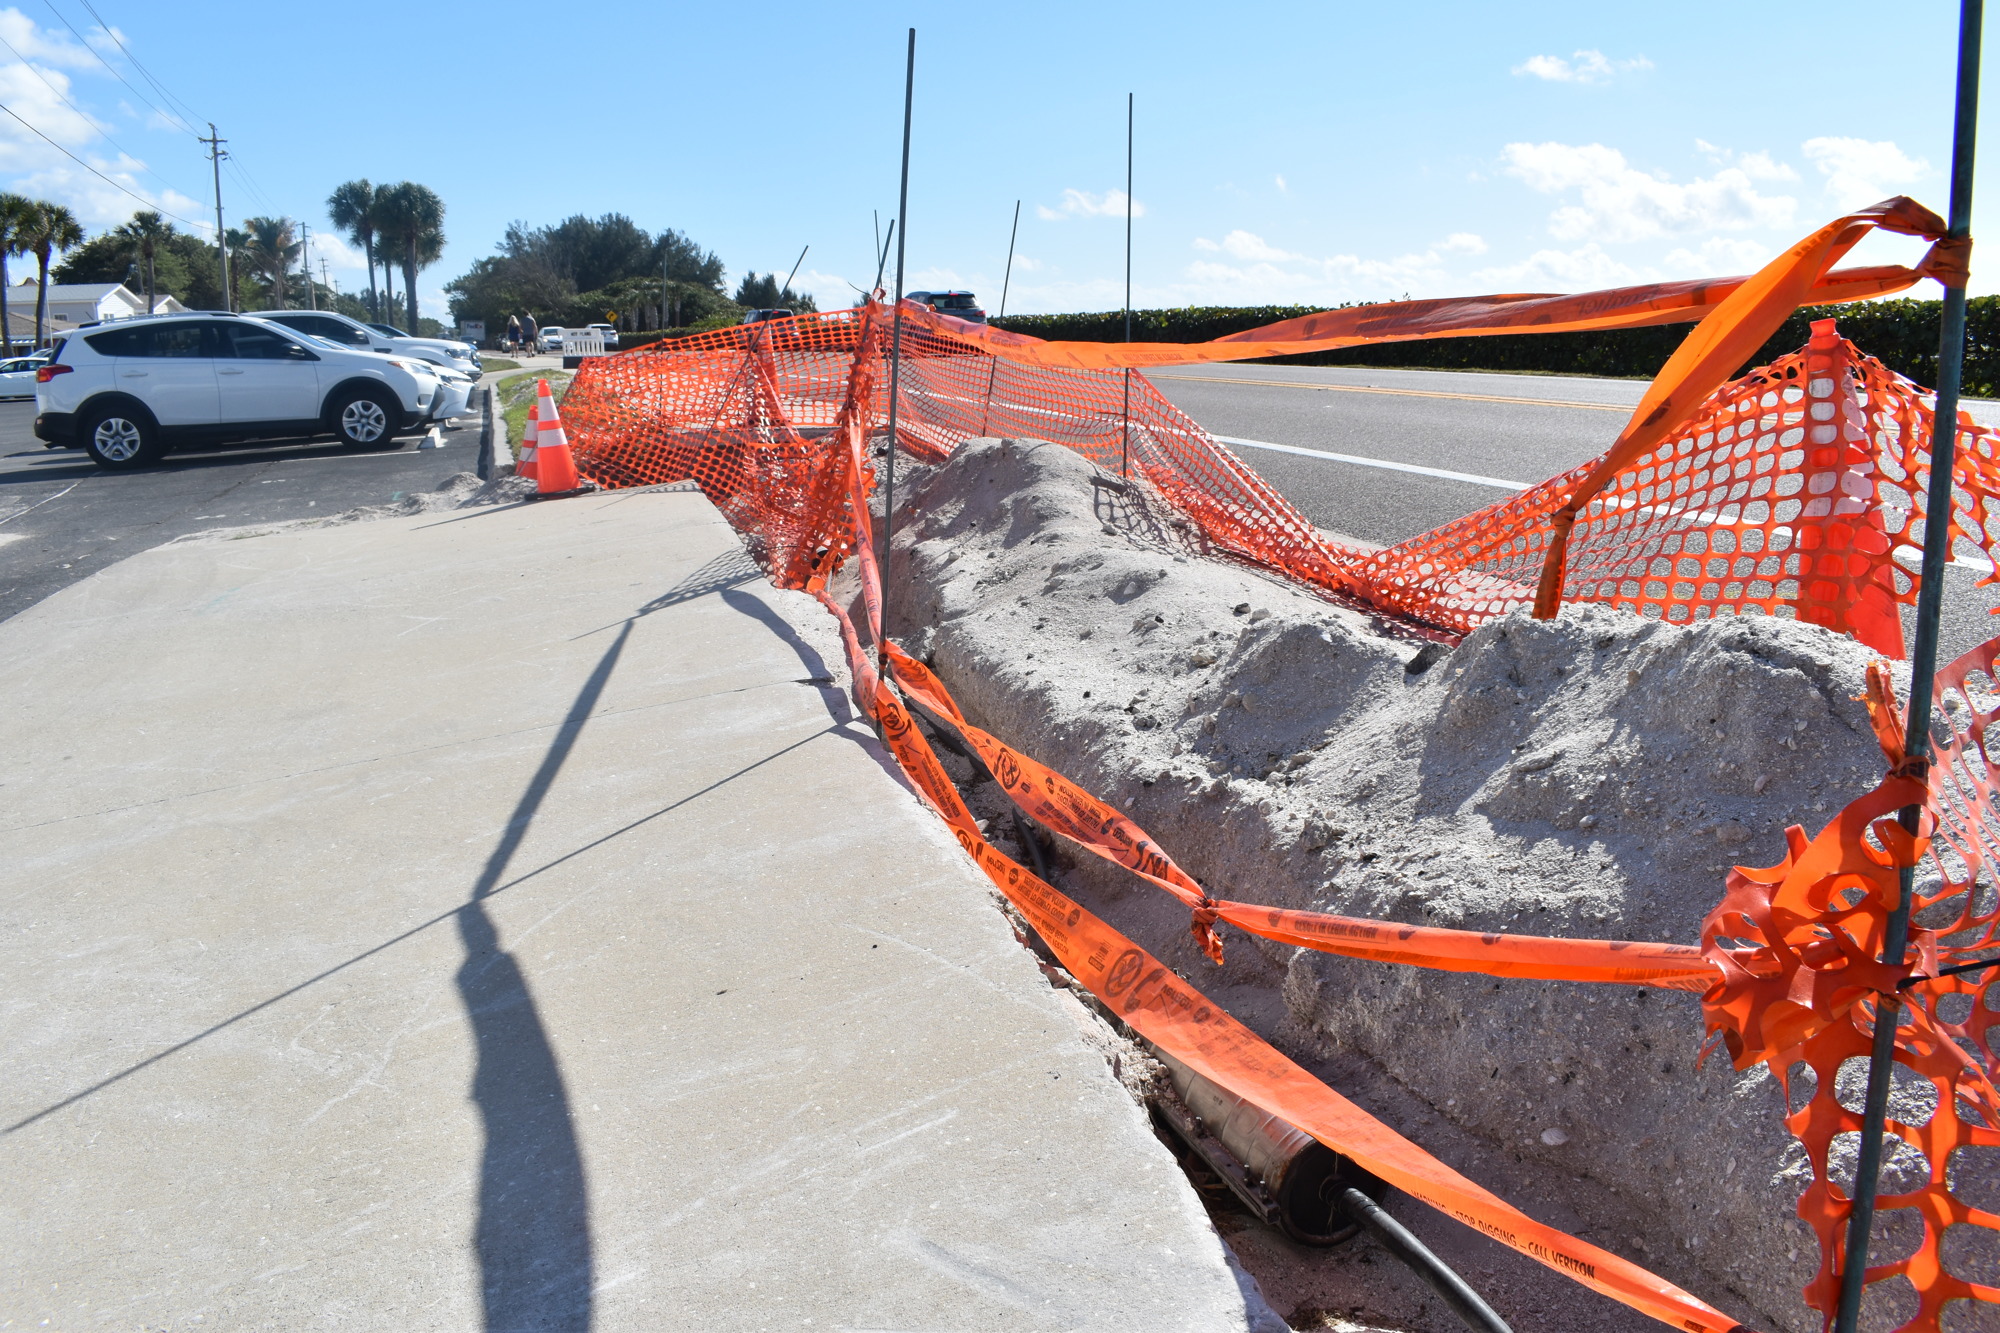 Since October 2021, a portion of the sidewalk on Gulf of Mexico Drive directly in front of the Twin Shores Mobile Home Park has been closed.